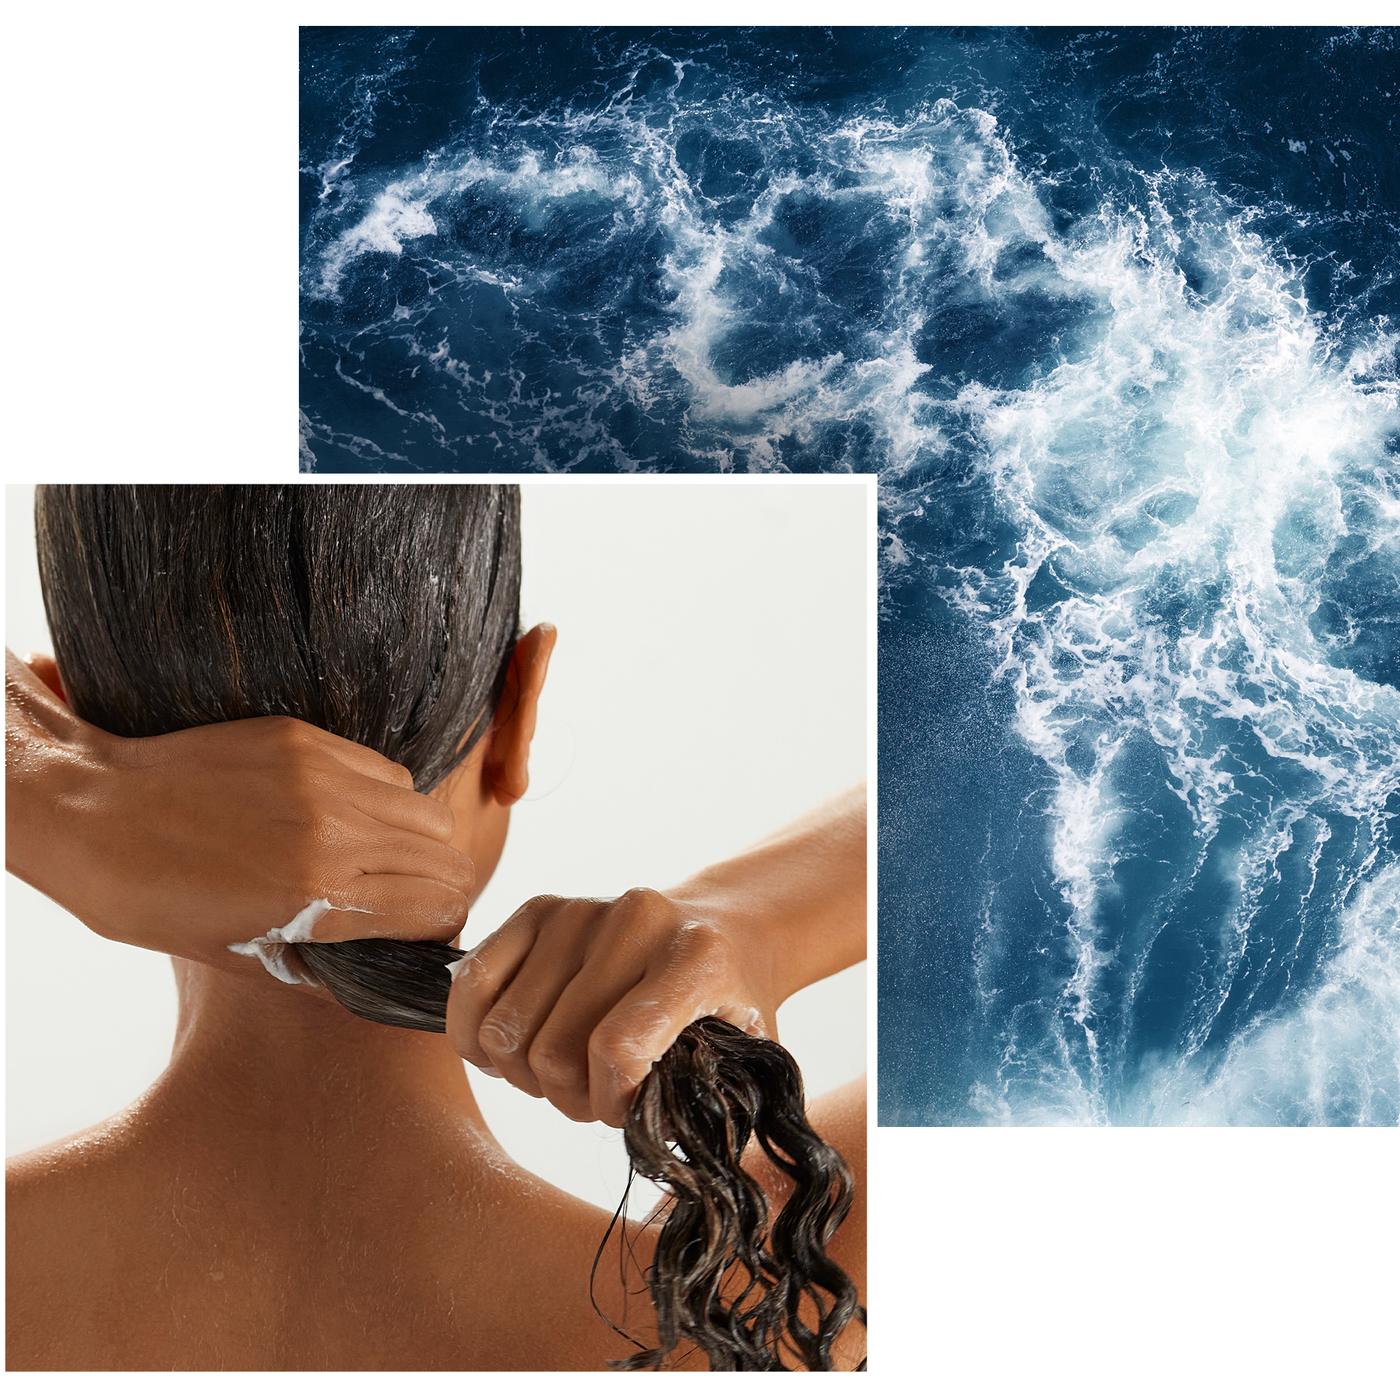 one image of a women washing her hair another image of water